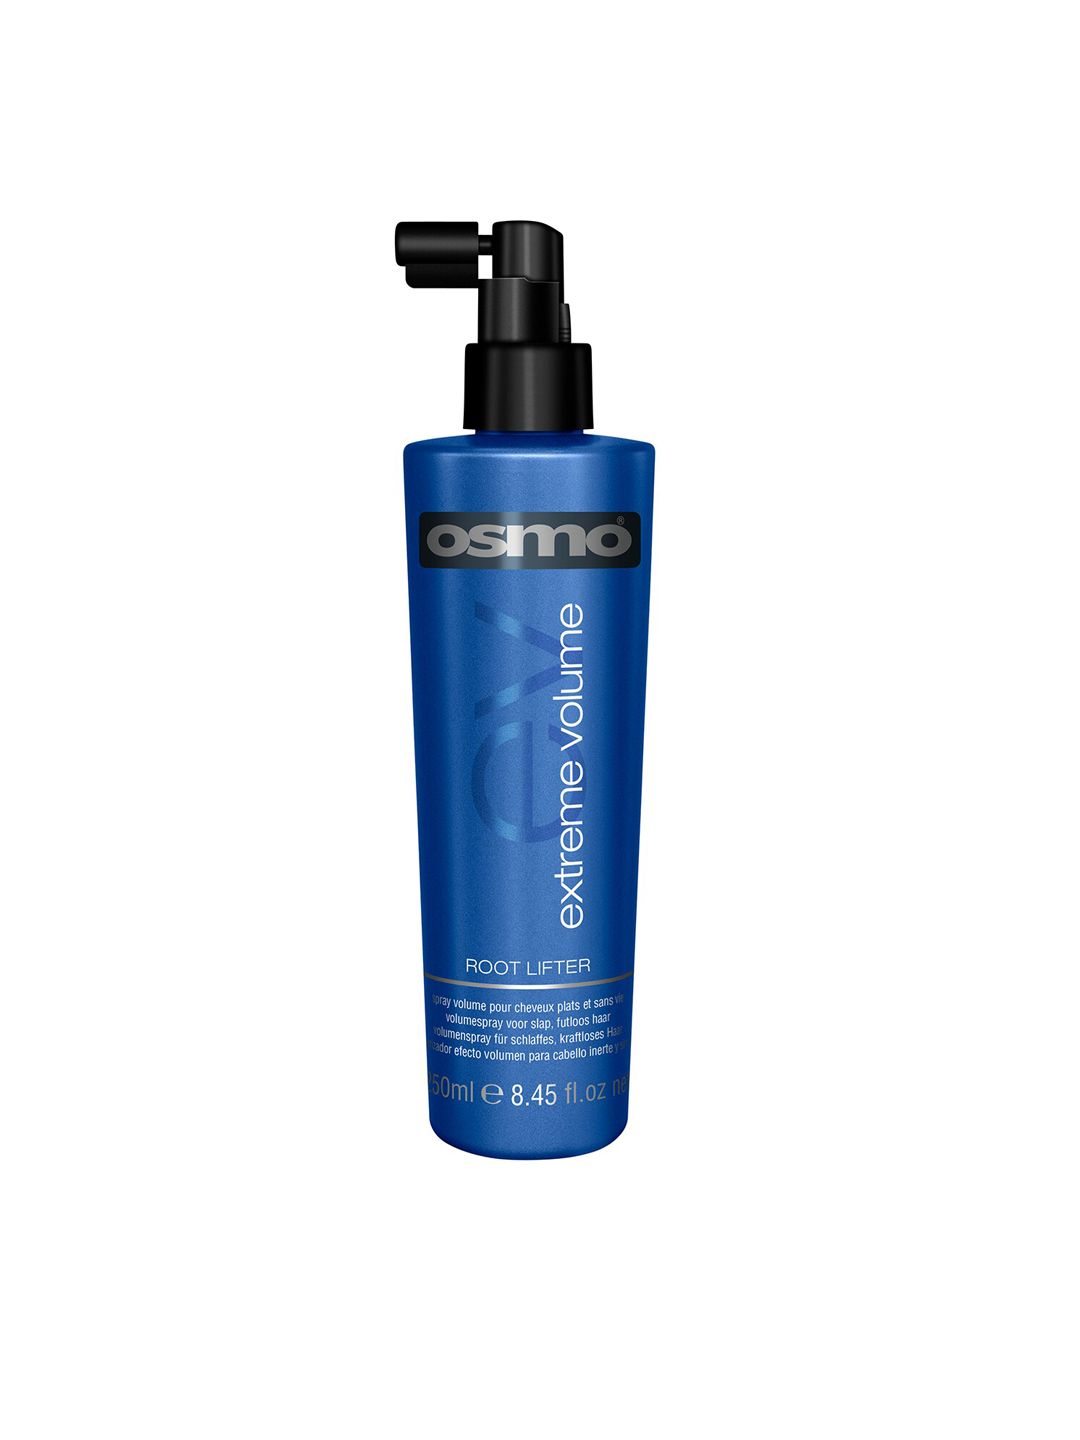 osmo Extreme Volume Root Lifter - 250 ml Price in India